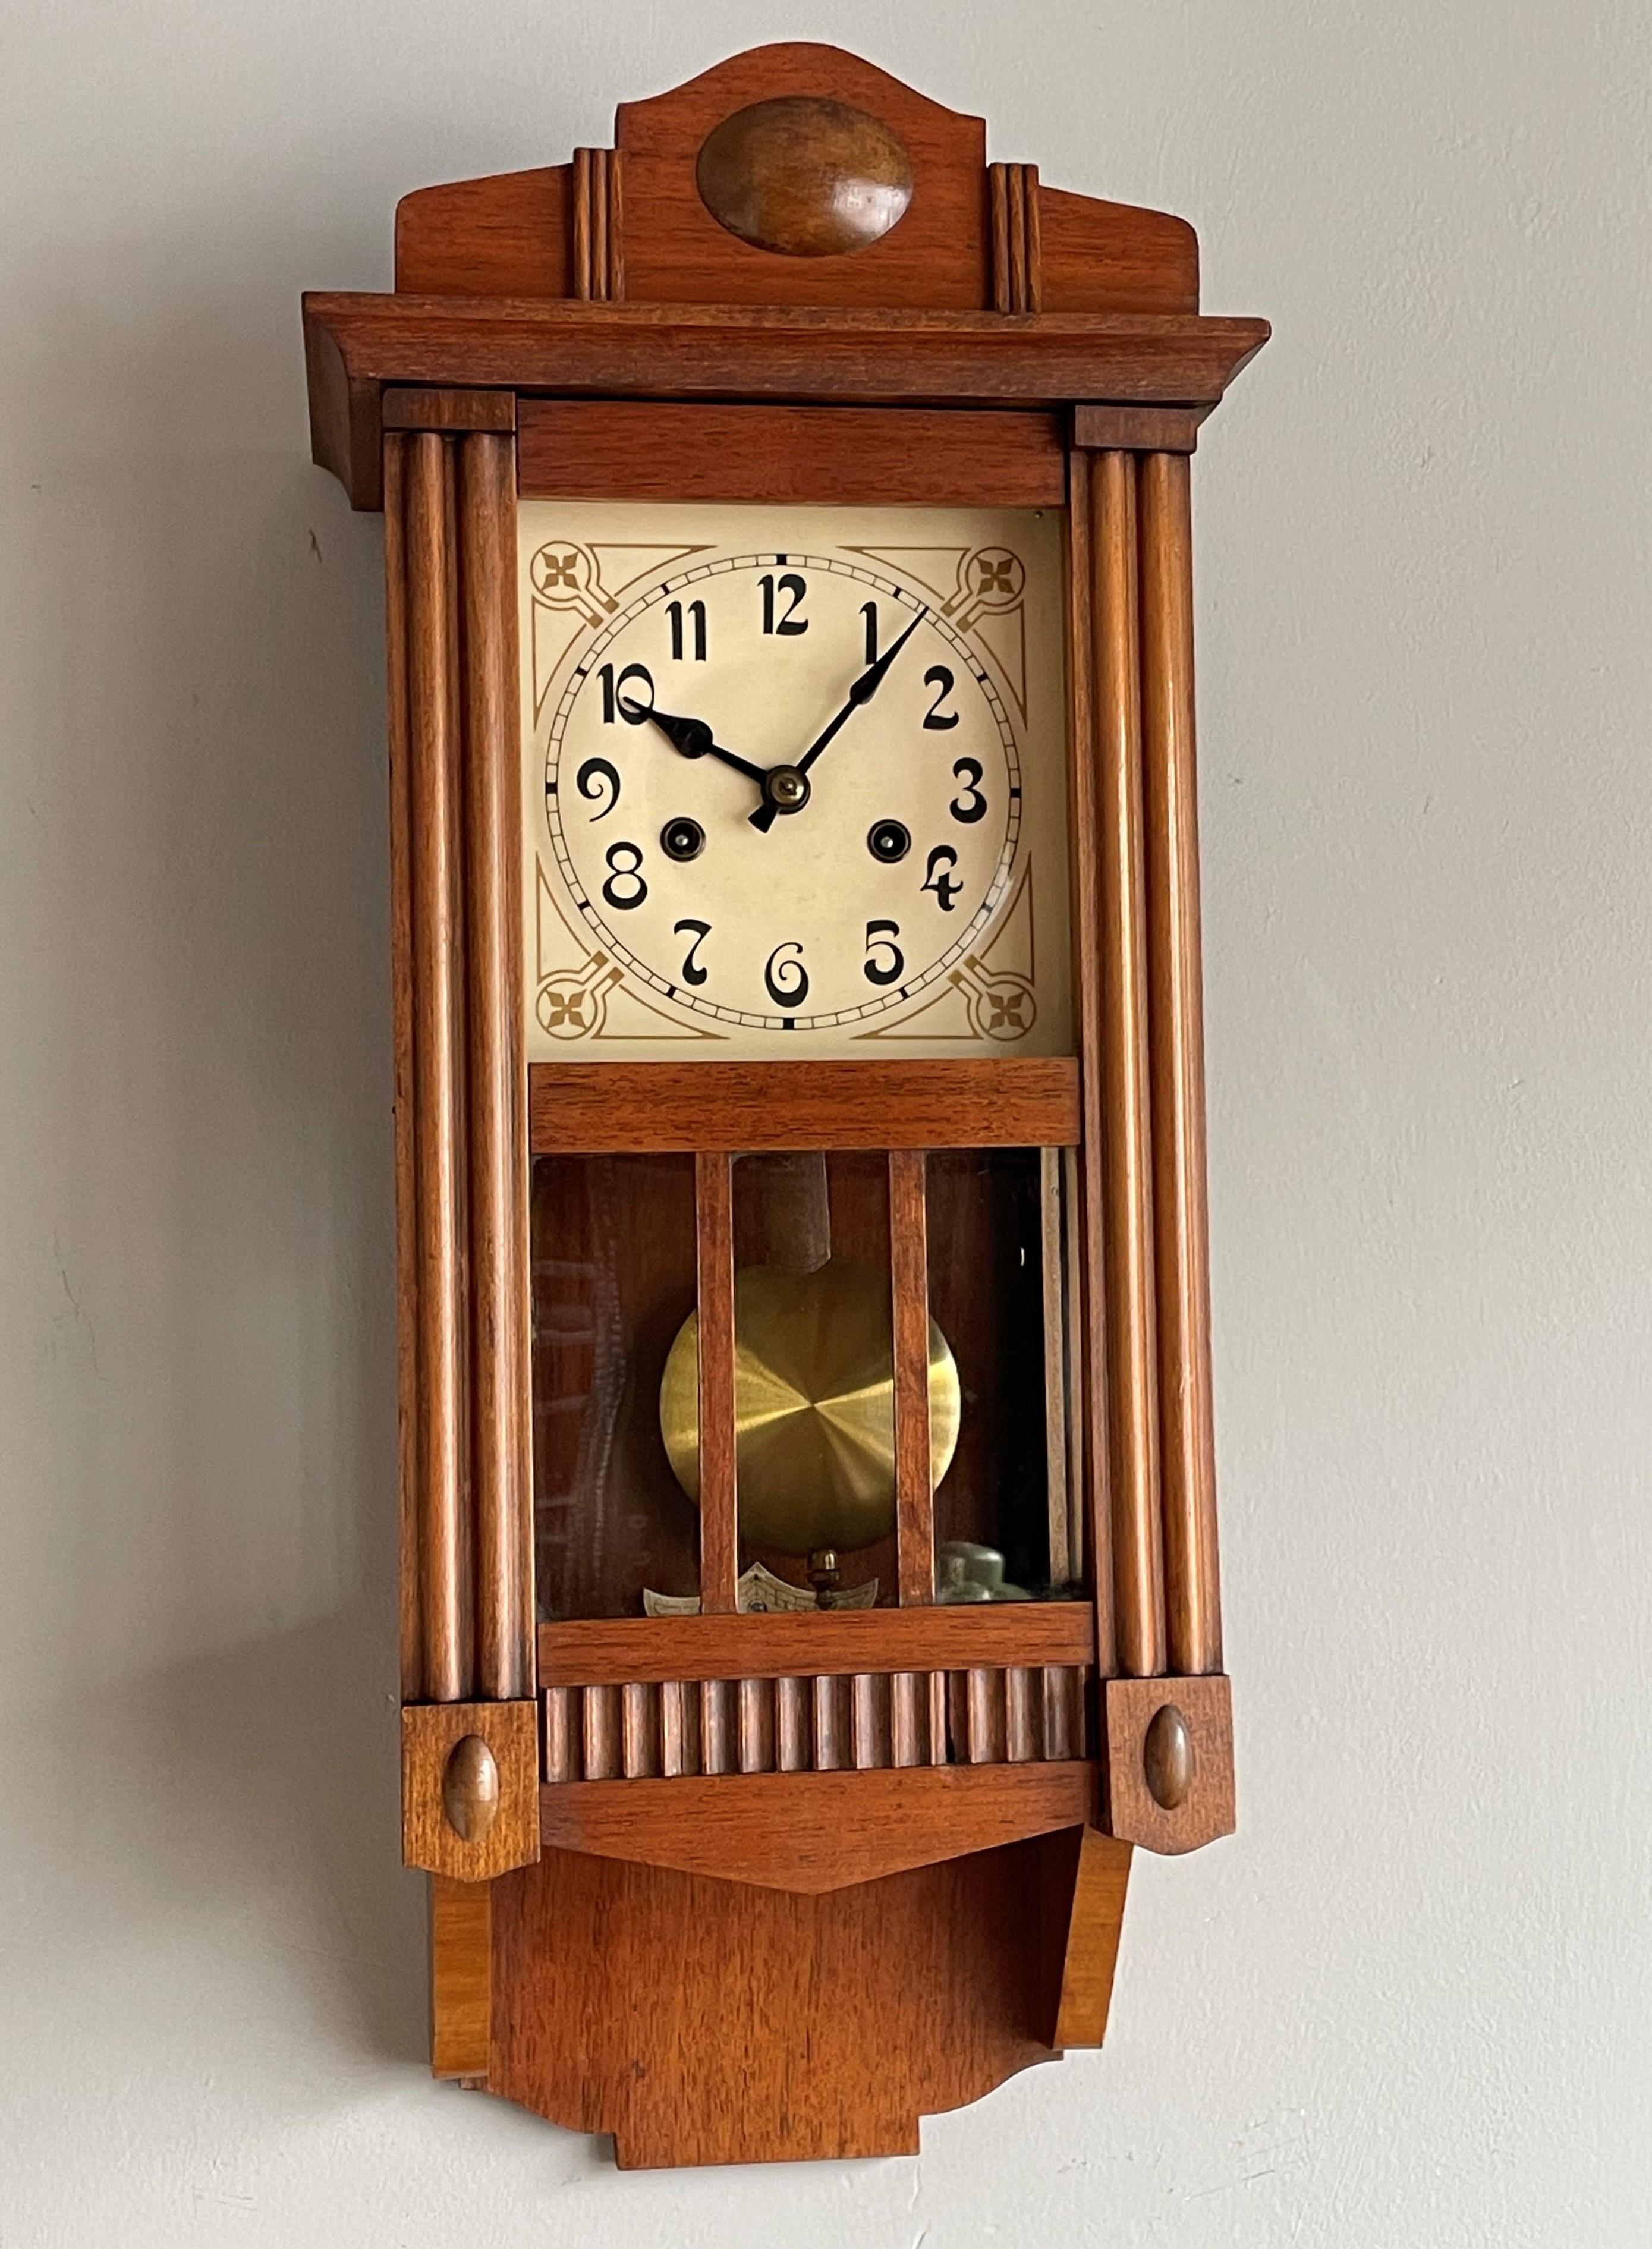 Early 20th century, great condition antique wall clock with the original glass panels.

Over the years we have sold a few dozen Arts & Crafts pendulums (or mantel clocks). They were all beautiful and unique in design, but they ARE out there.